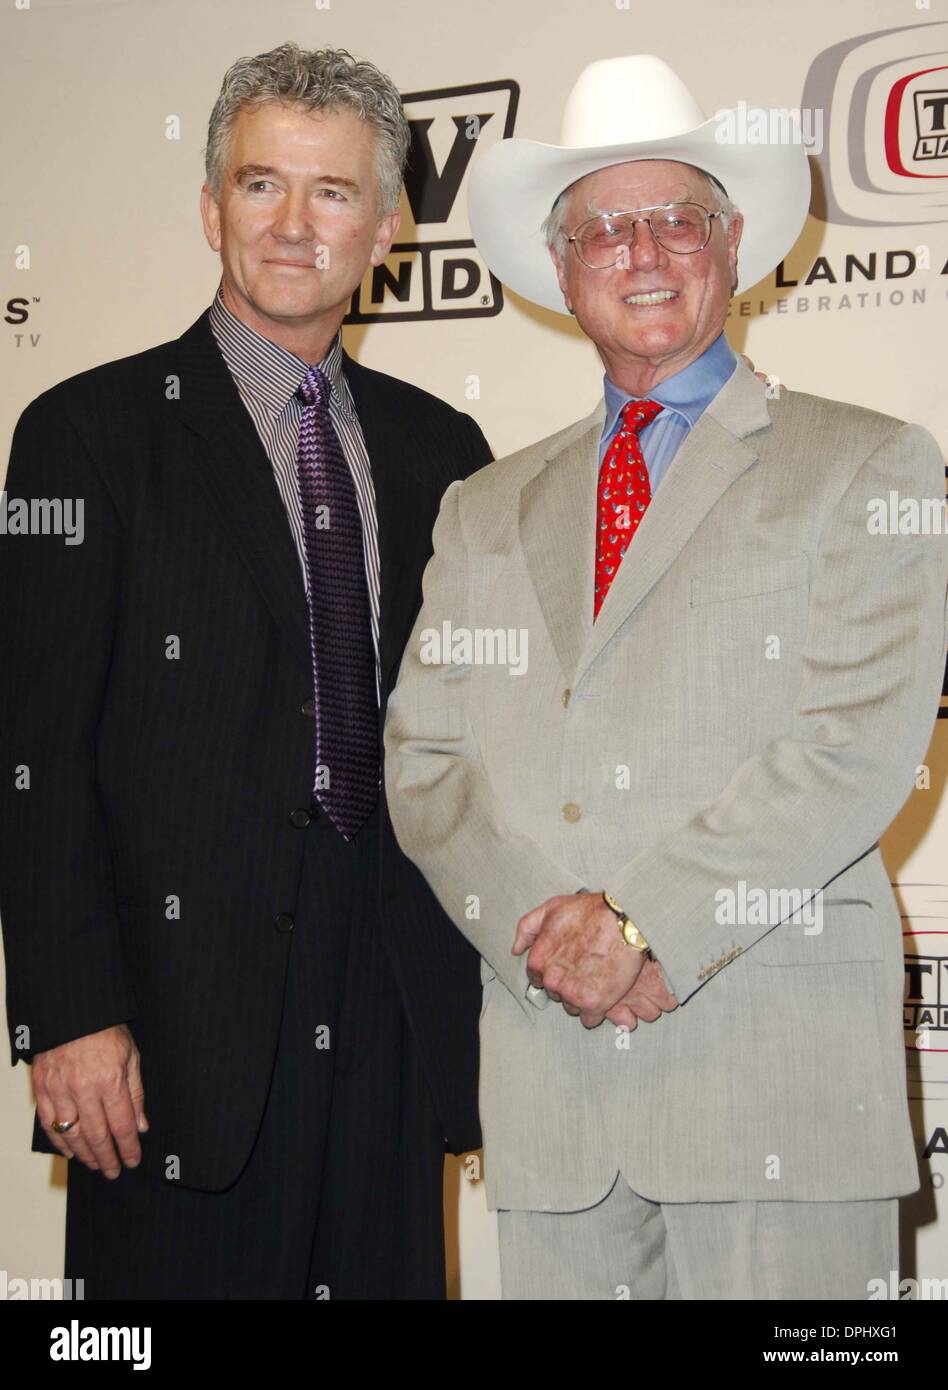 Mar. 19, 2006 - Hollywood, California, U.S. - SANTA MONICA, CA MARCH 19, 2006 (SSI) - -.Actors Patrick Duffy and Larry Hagman pose for photographers, during the 2006 TV LAND AWARDS, held at the Barker Hanger, on March 19, 2006, in Santa Monica, California.   / Super Star Images.  -   K47283MG(Credit Image: © Michael Germana/Globe Photos/ZUMAPRESS.com) Stock Photo